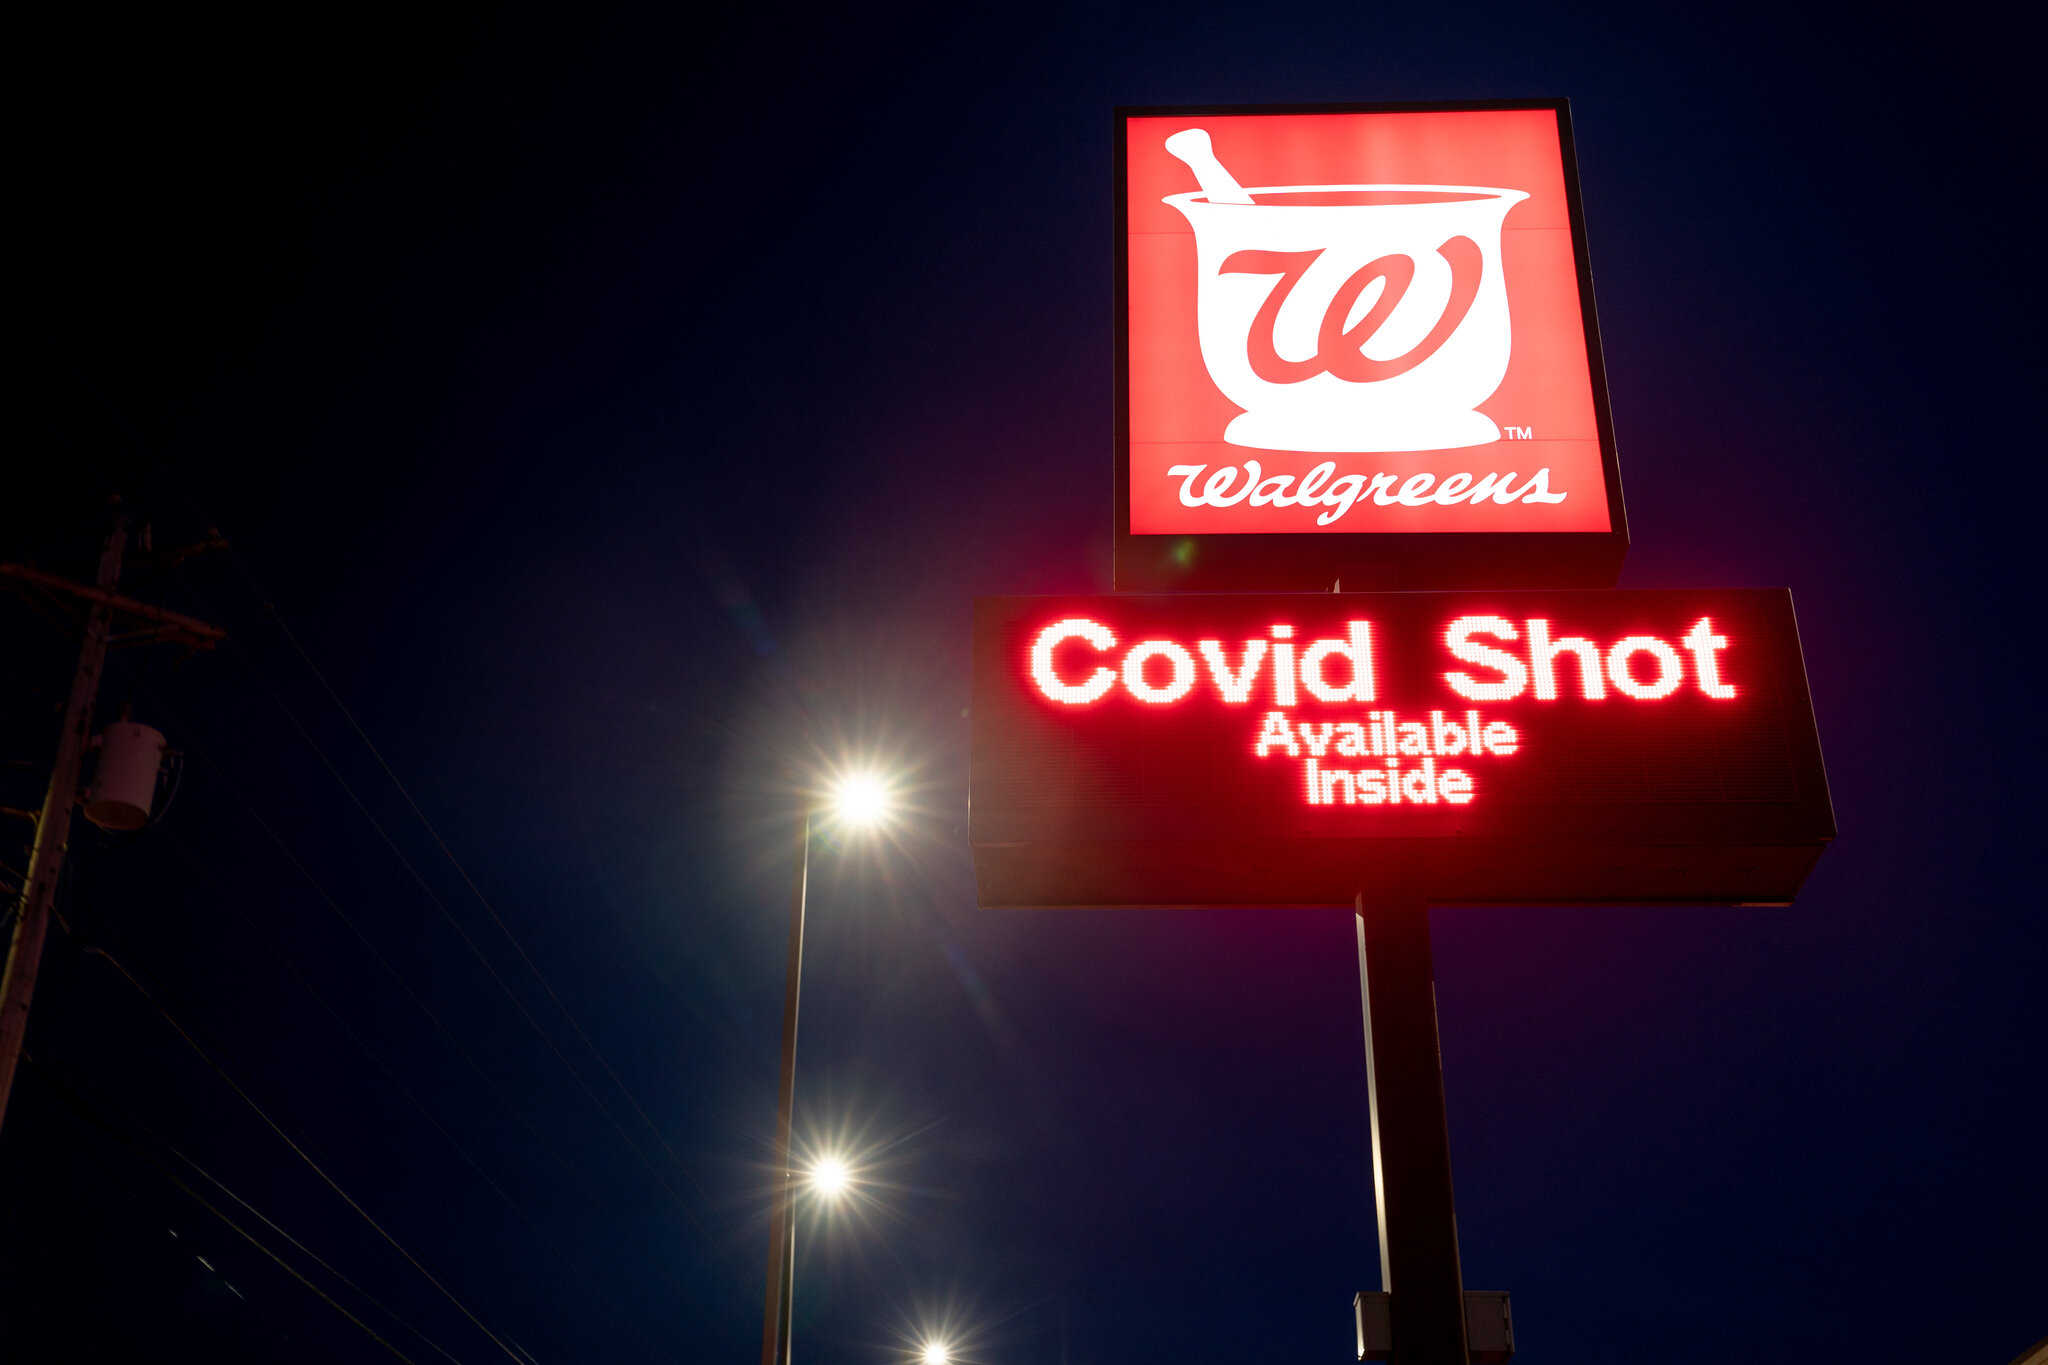 Walgreens Covid Booster Vaccine/Appointment